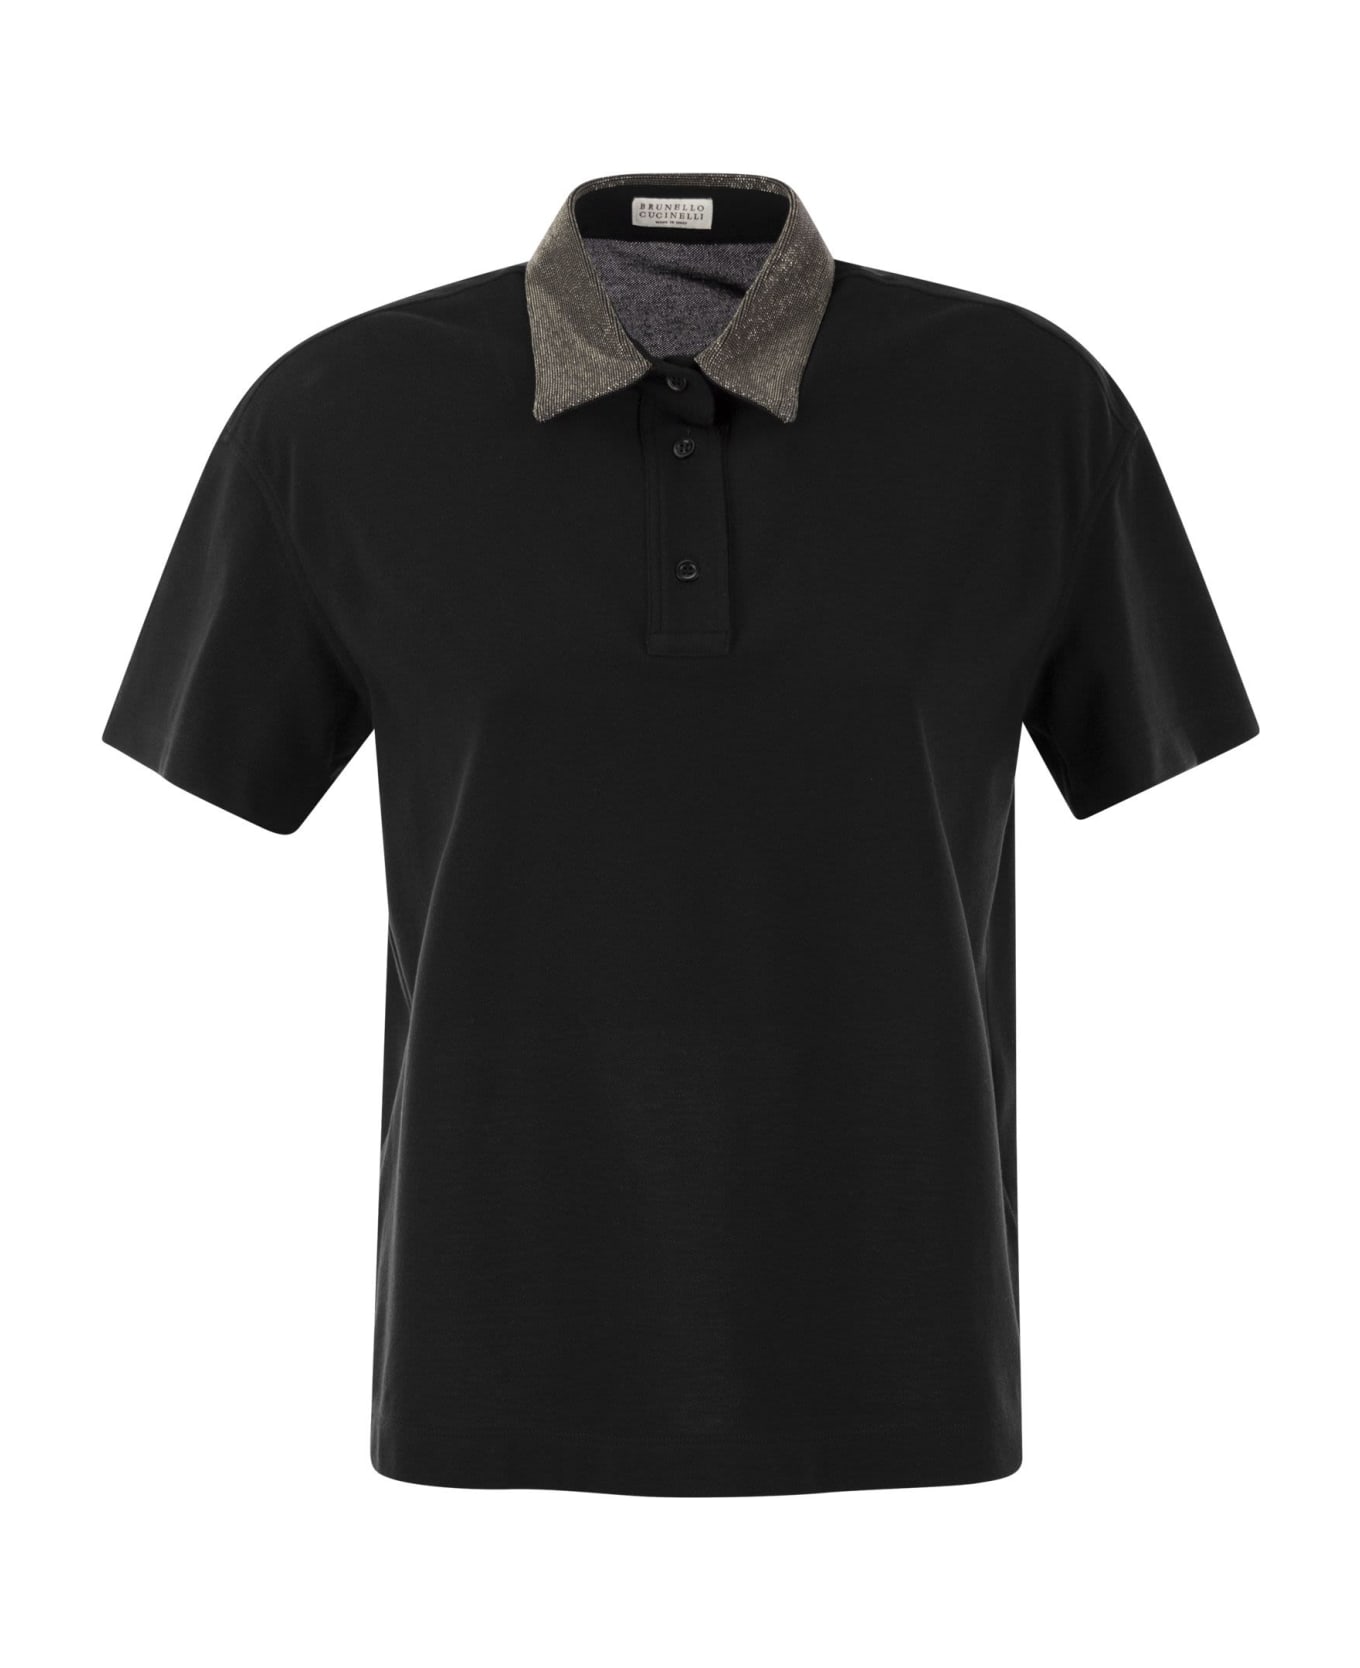 Brunello Cucinelli Cotton Polo Shirt With Jewelled Collar - Black